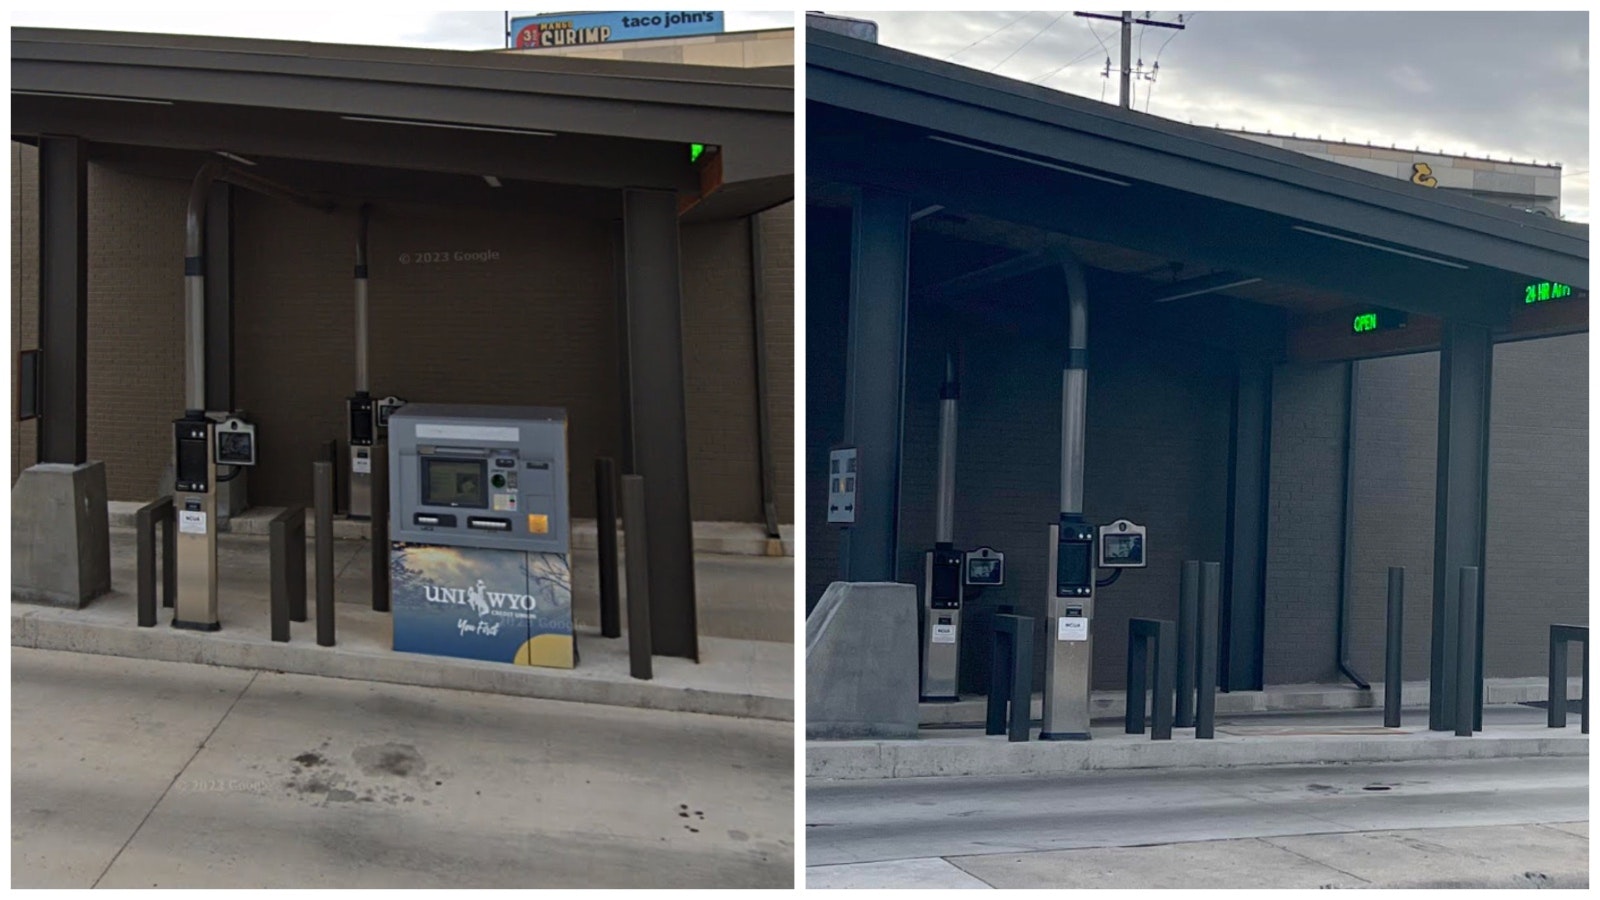 Before and after photos of the ATM that was recently stolen in Cheyenne